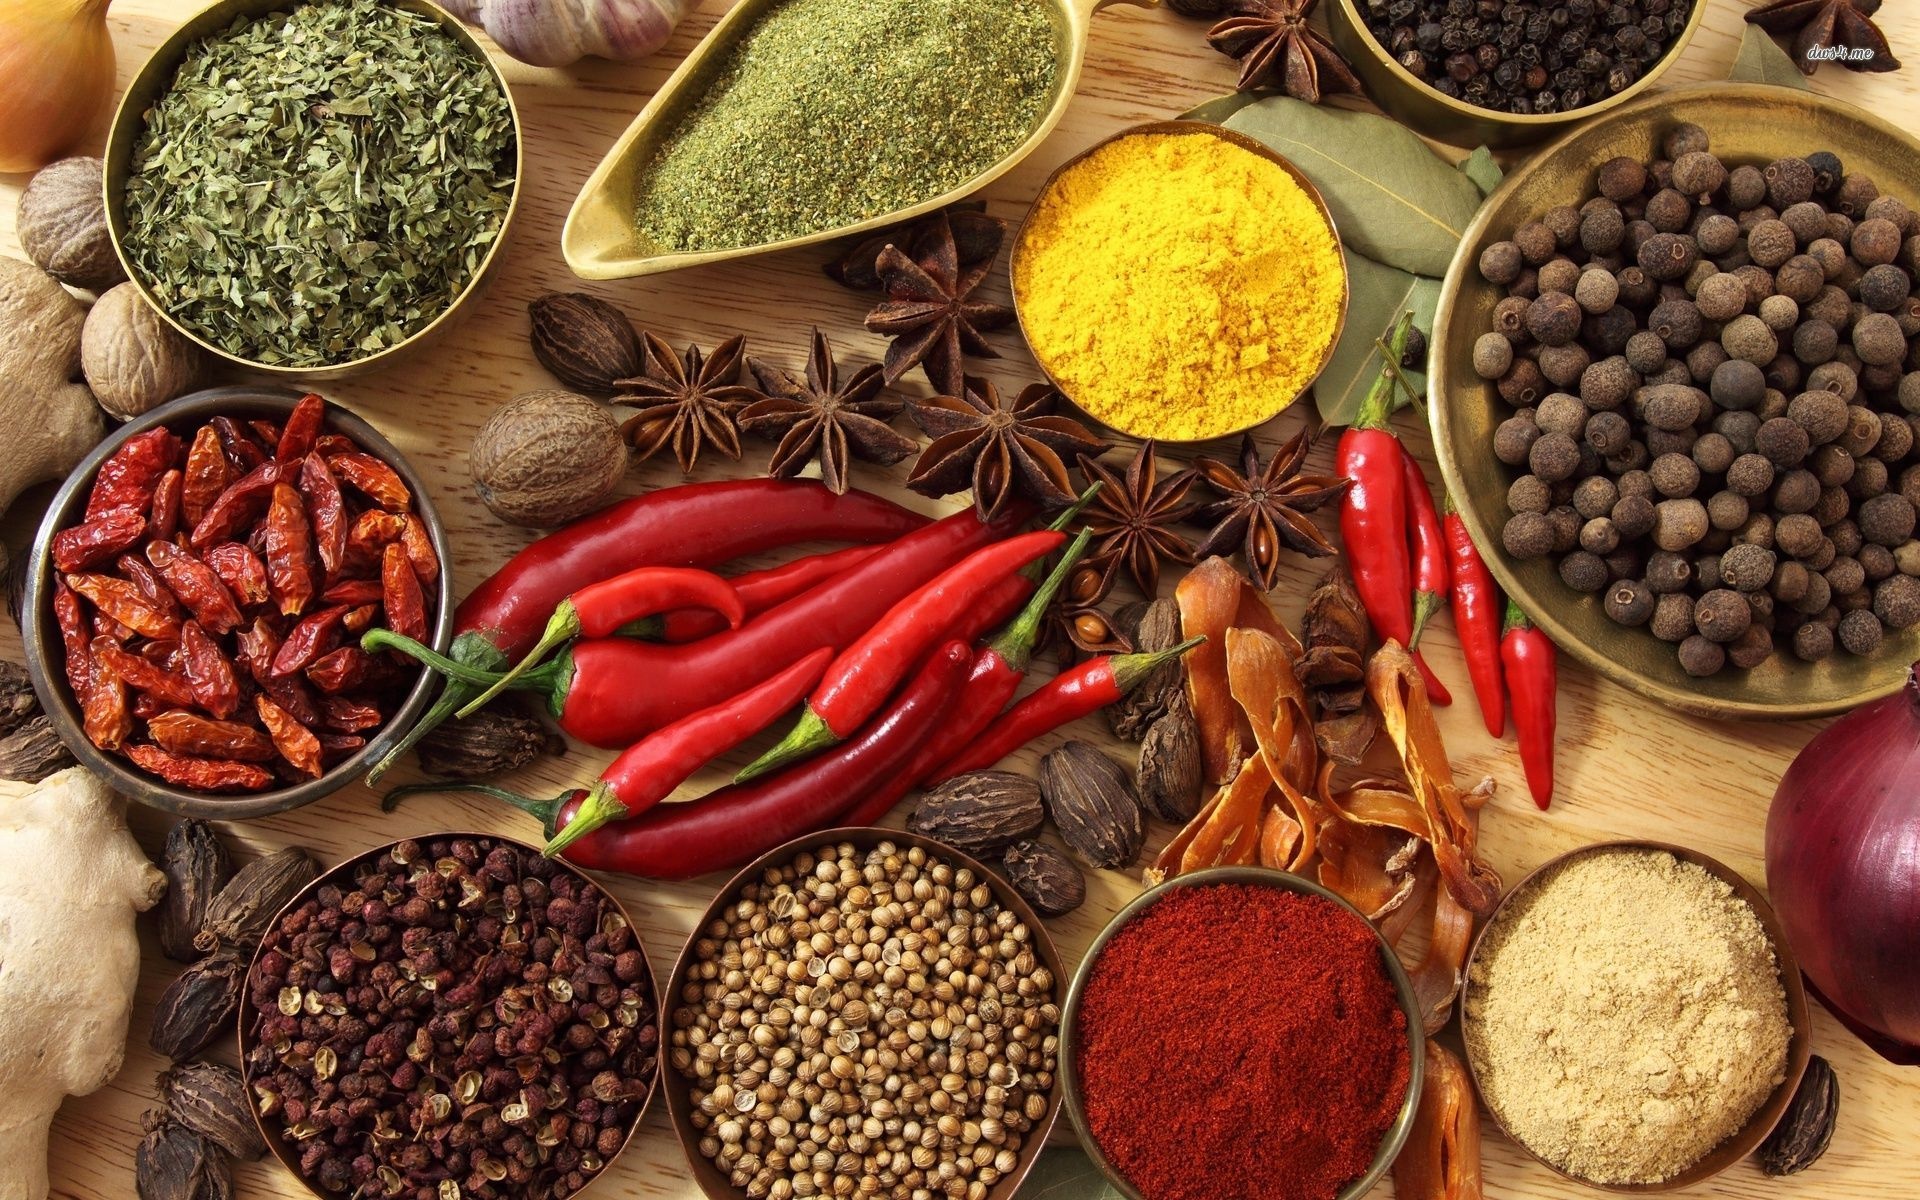 Flavorful spices, Spice blends, Seasoning collection, Culinary essentials, 1920x1200 HD Desktop